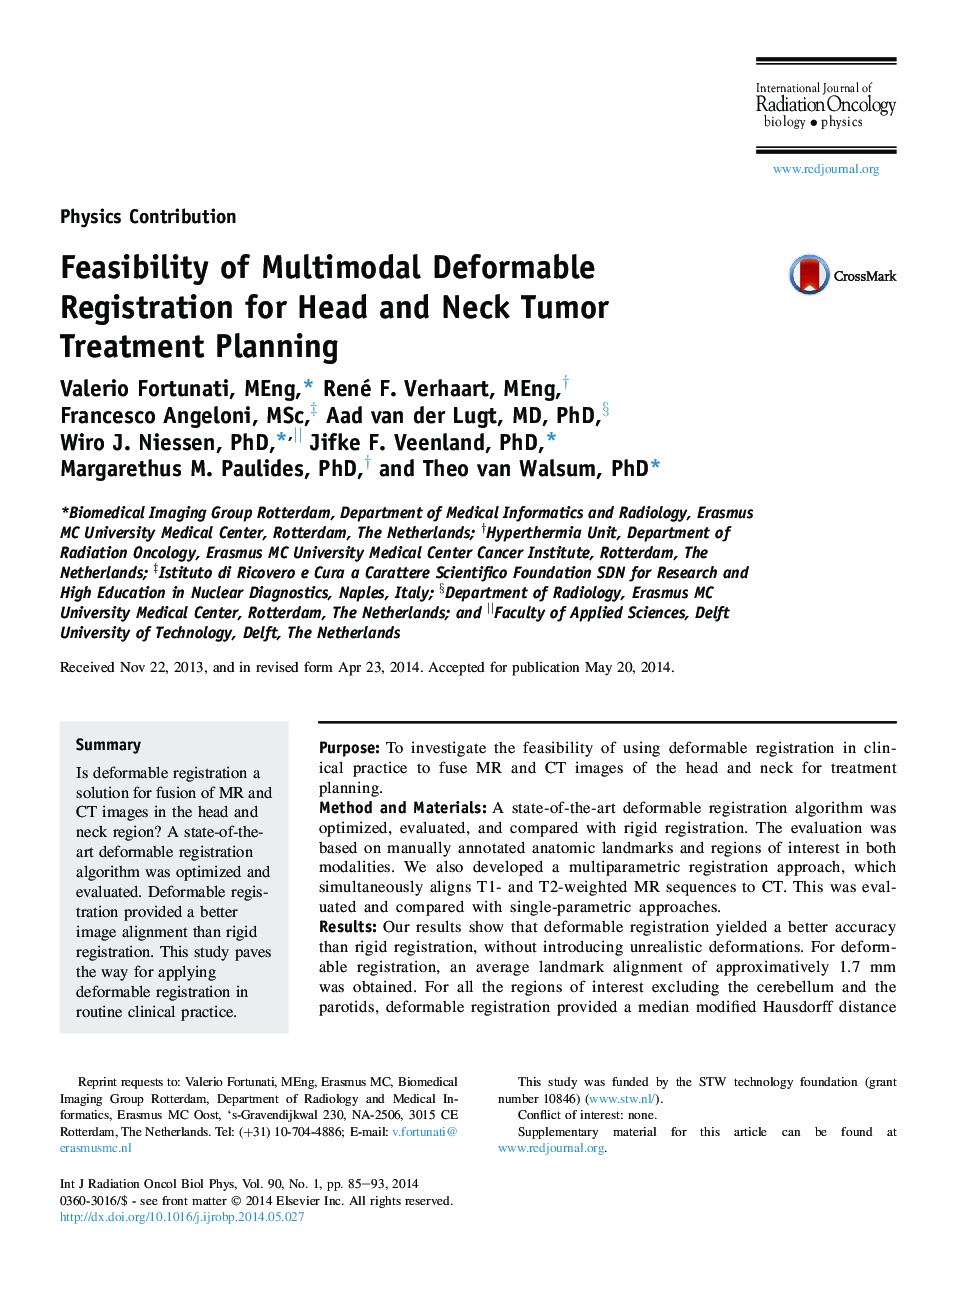 Feasibility of Multimodal Deformable Registration for Head and Neck Tumor Treatment Planning